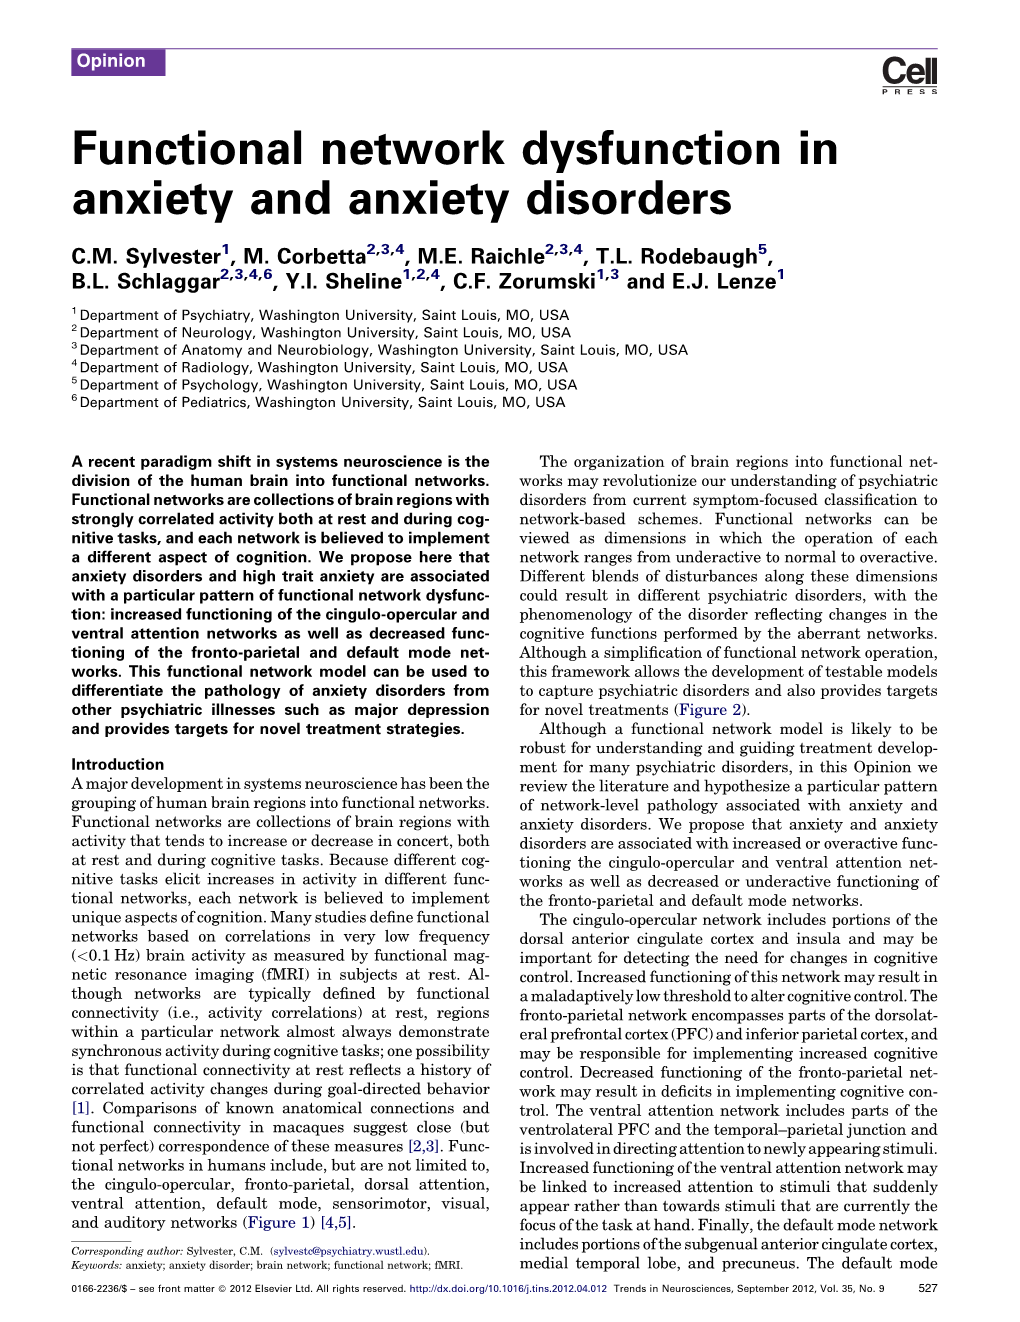 Functional Network Dysfunction in Anxiety and Anxiety Disorders